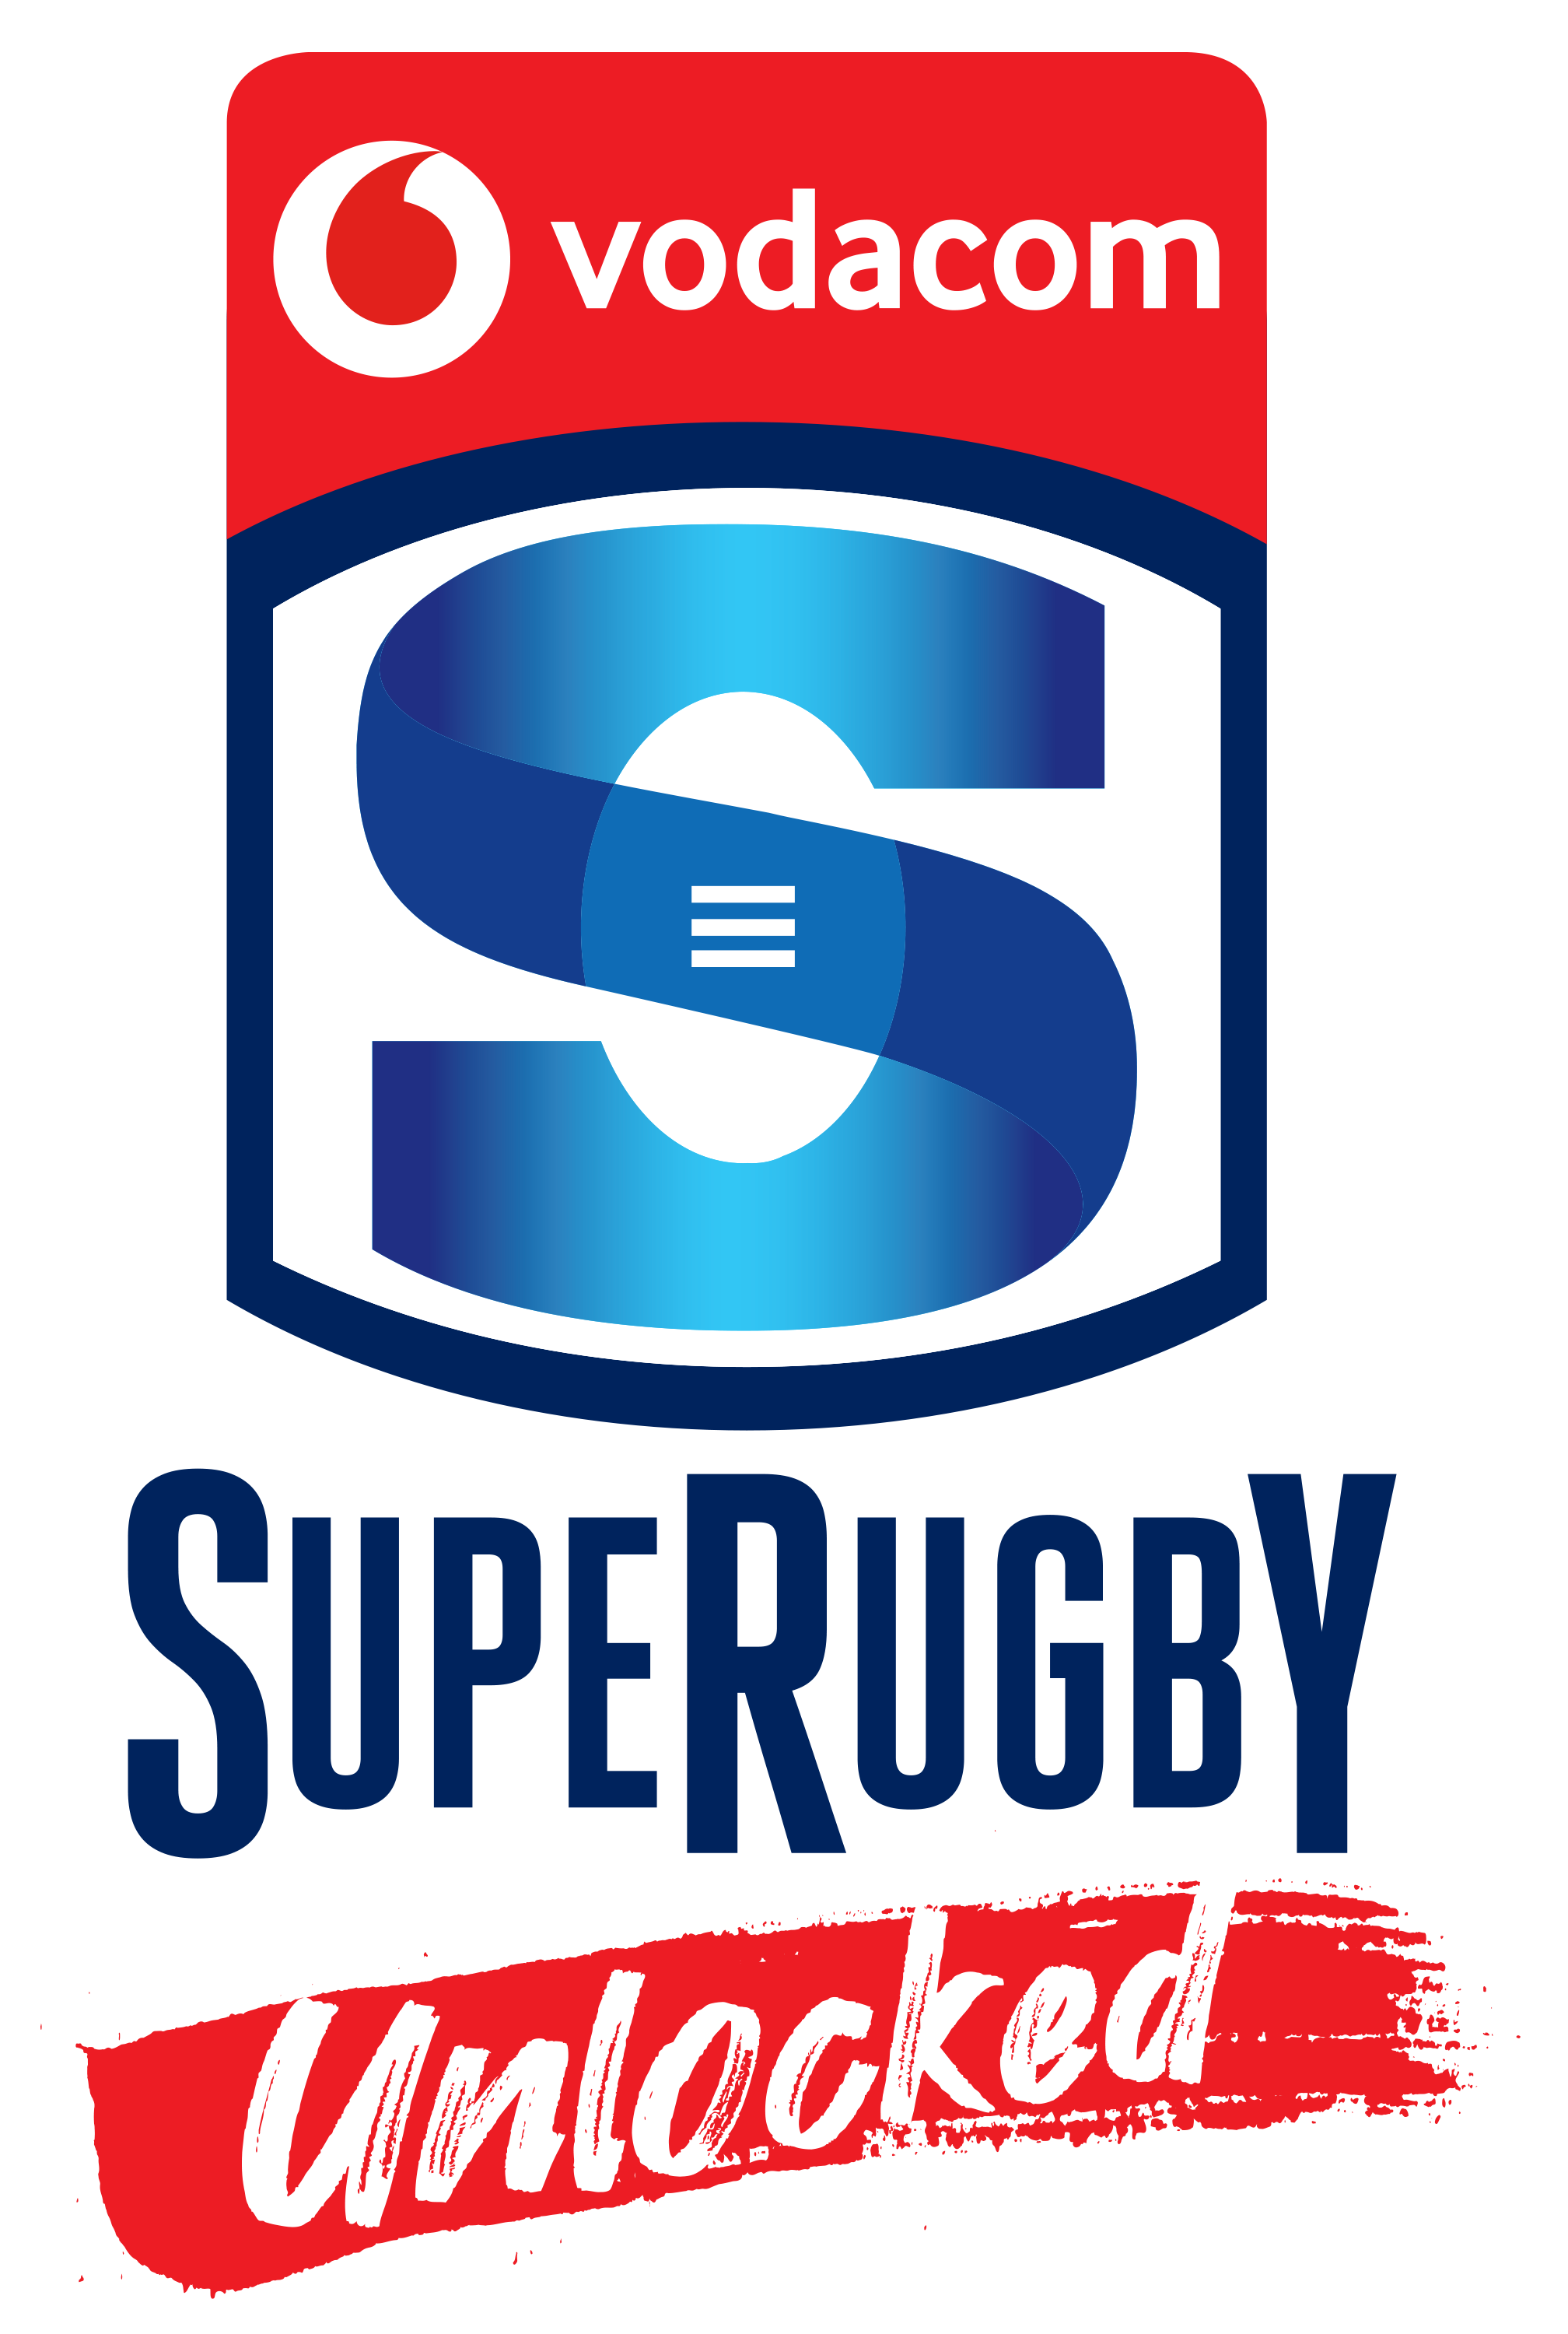 About Super Rugby